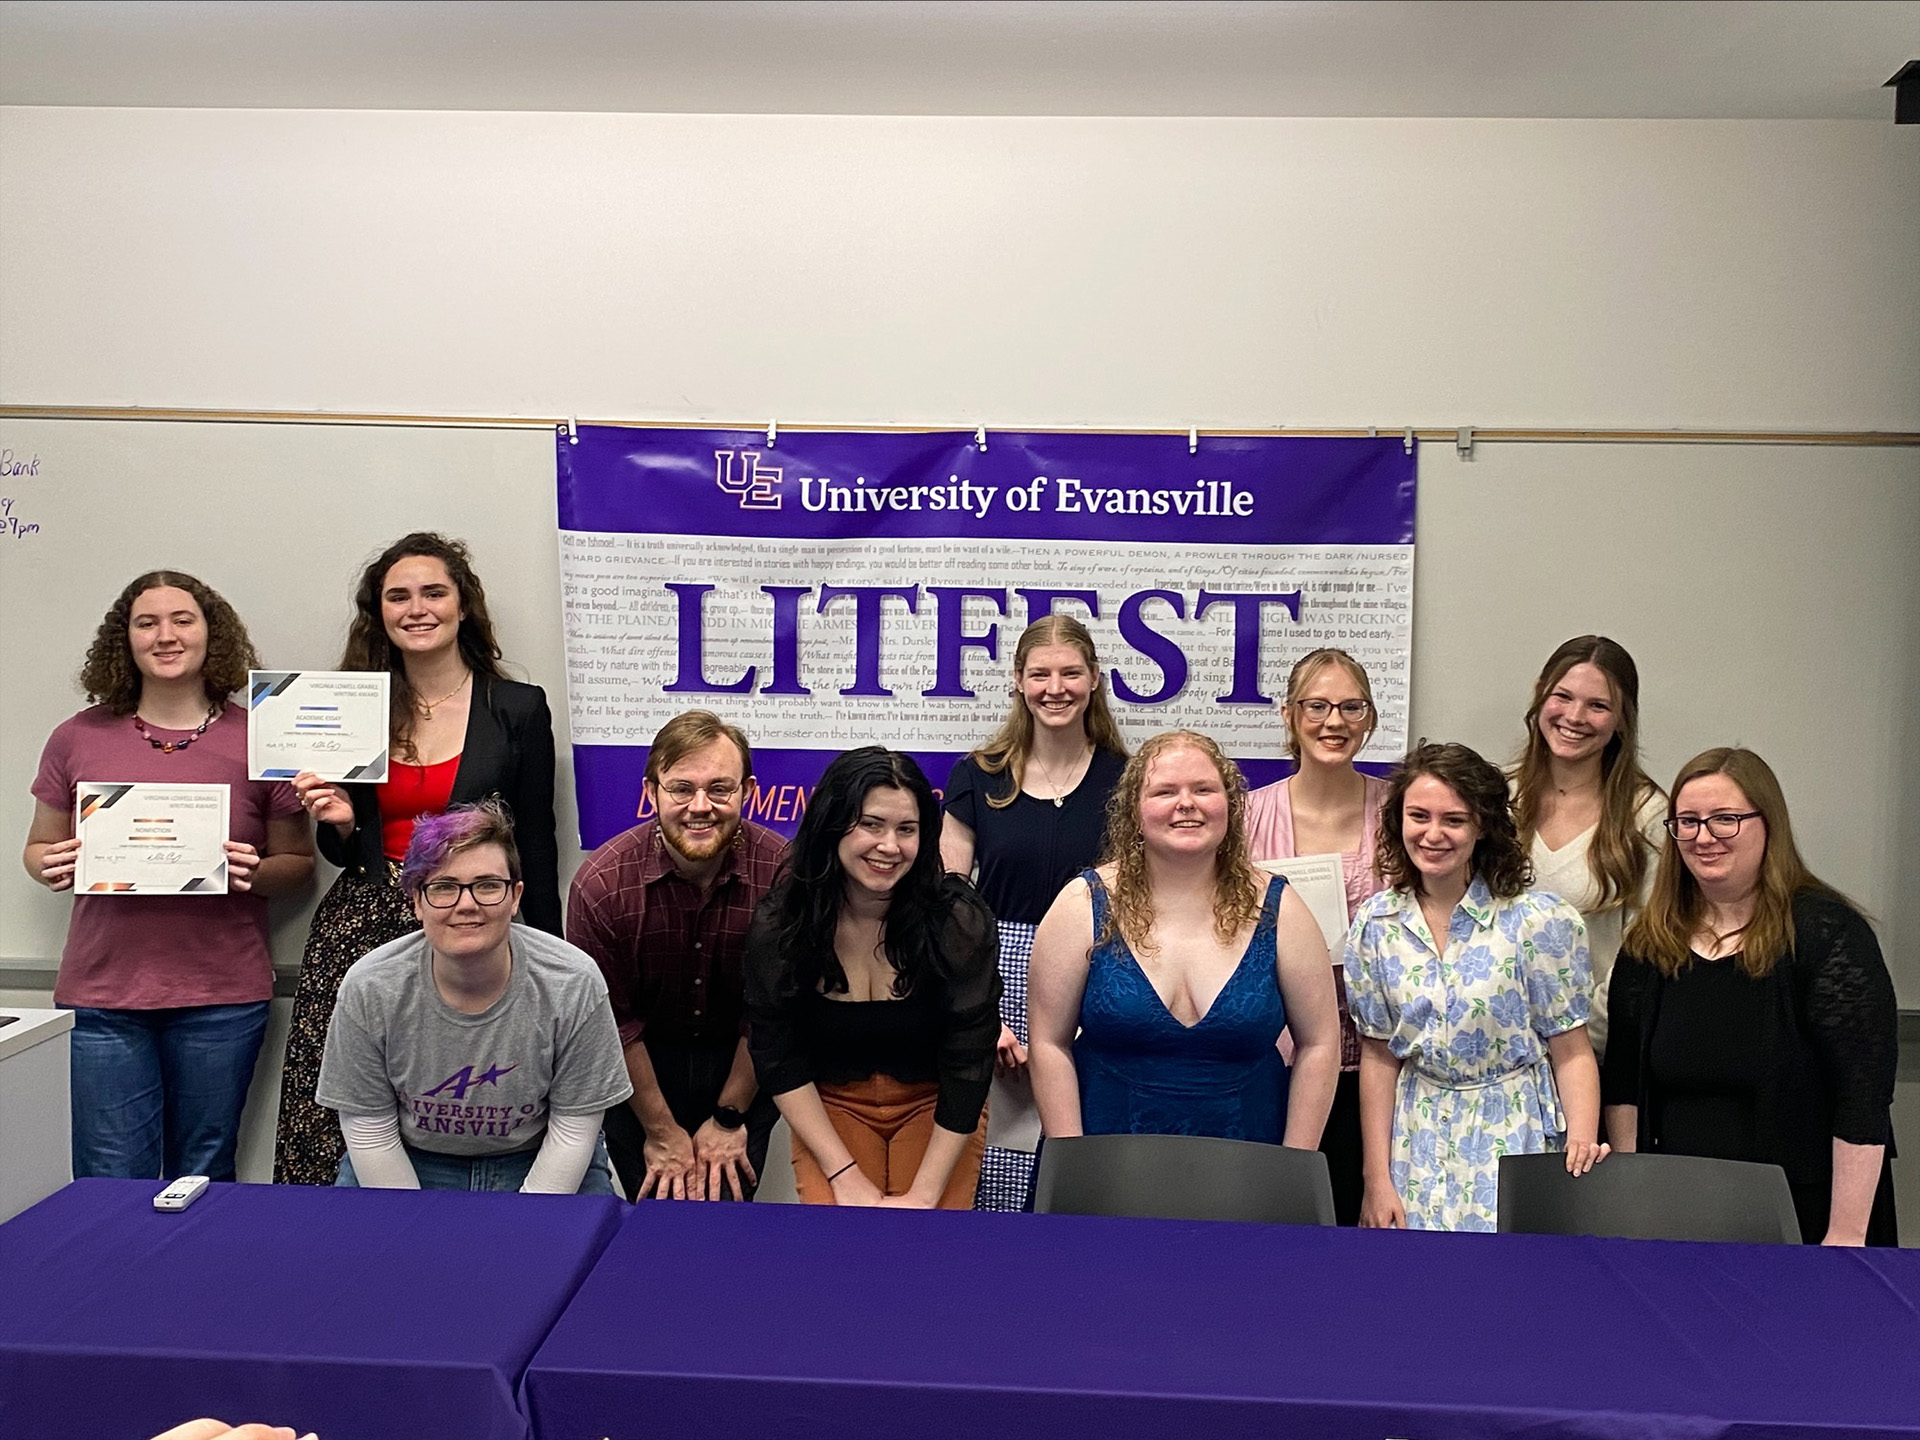 At the end of the awards ceremony, the present prize winners and speakers gathered for a group photo. Left to right: Sam Fowler, Christina Jesenski, Hayden Chrapek, McAllister Stowall, Elizabeth Dye, Caroline Gorman, Olivia Oswald, Elle Hardoin, Madison Conway, Elizabeth McCook, and Samantha Anderson.